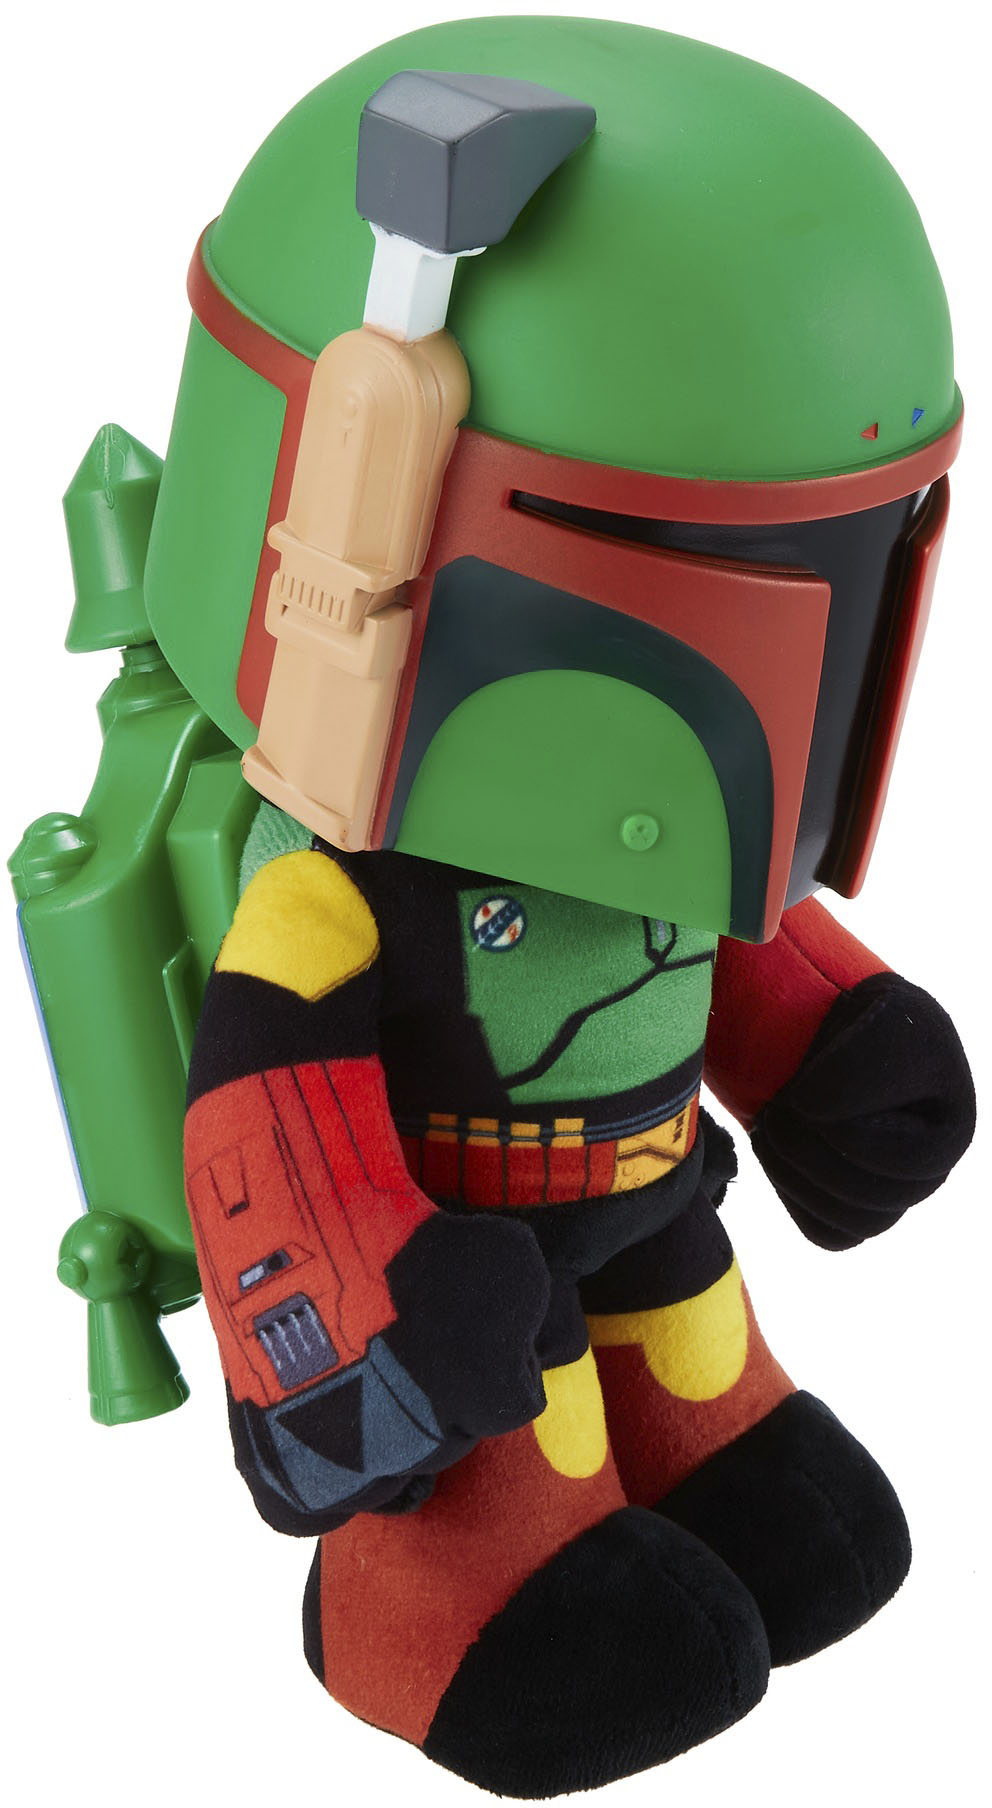 Star Wars Buildable Figure Boba Fett Toy For Kids Without Box Free Shipping 